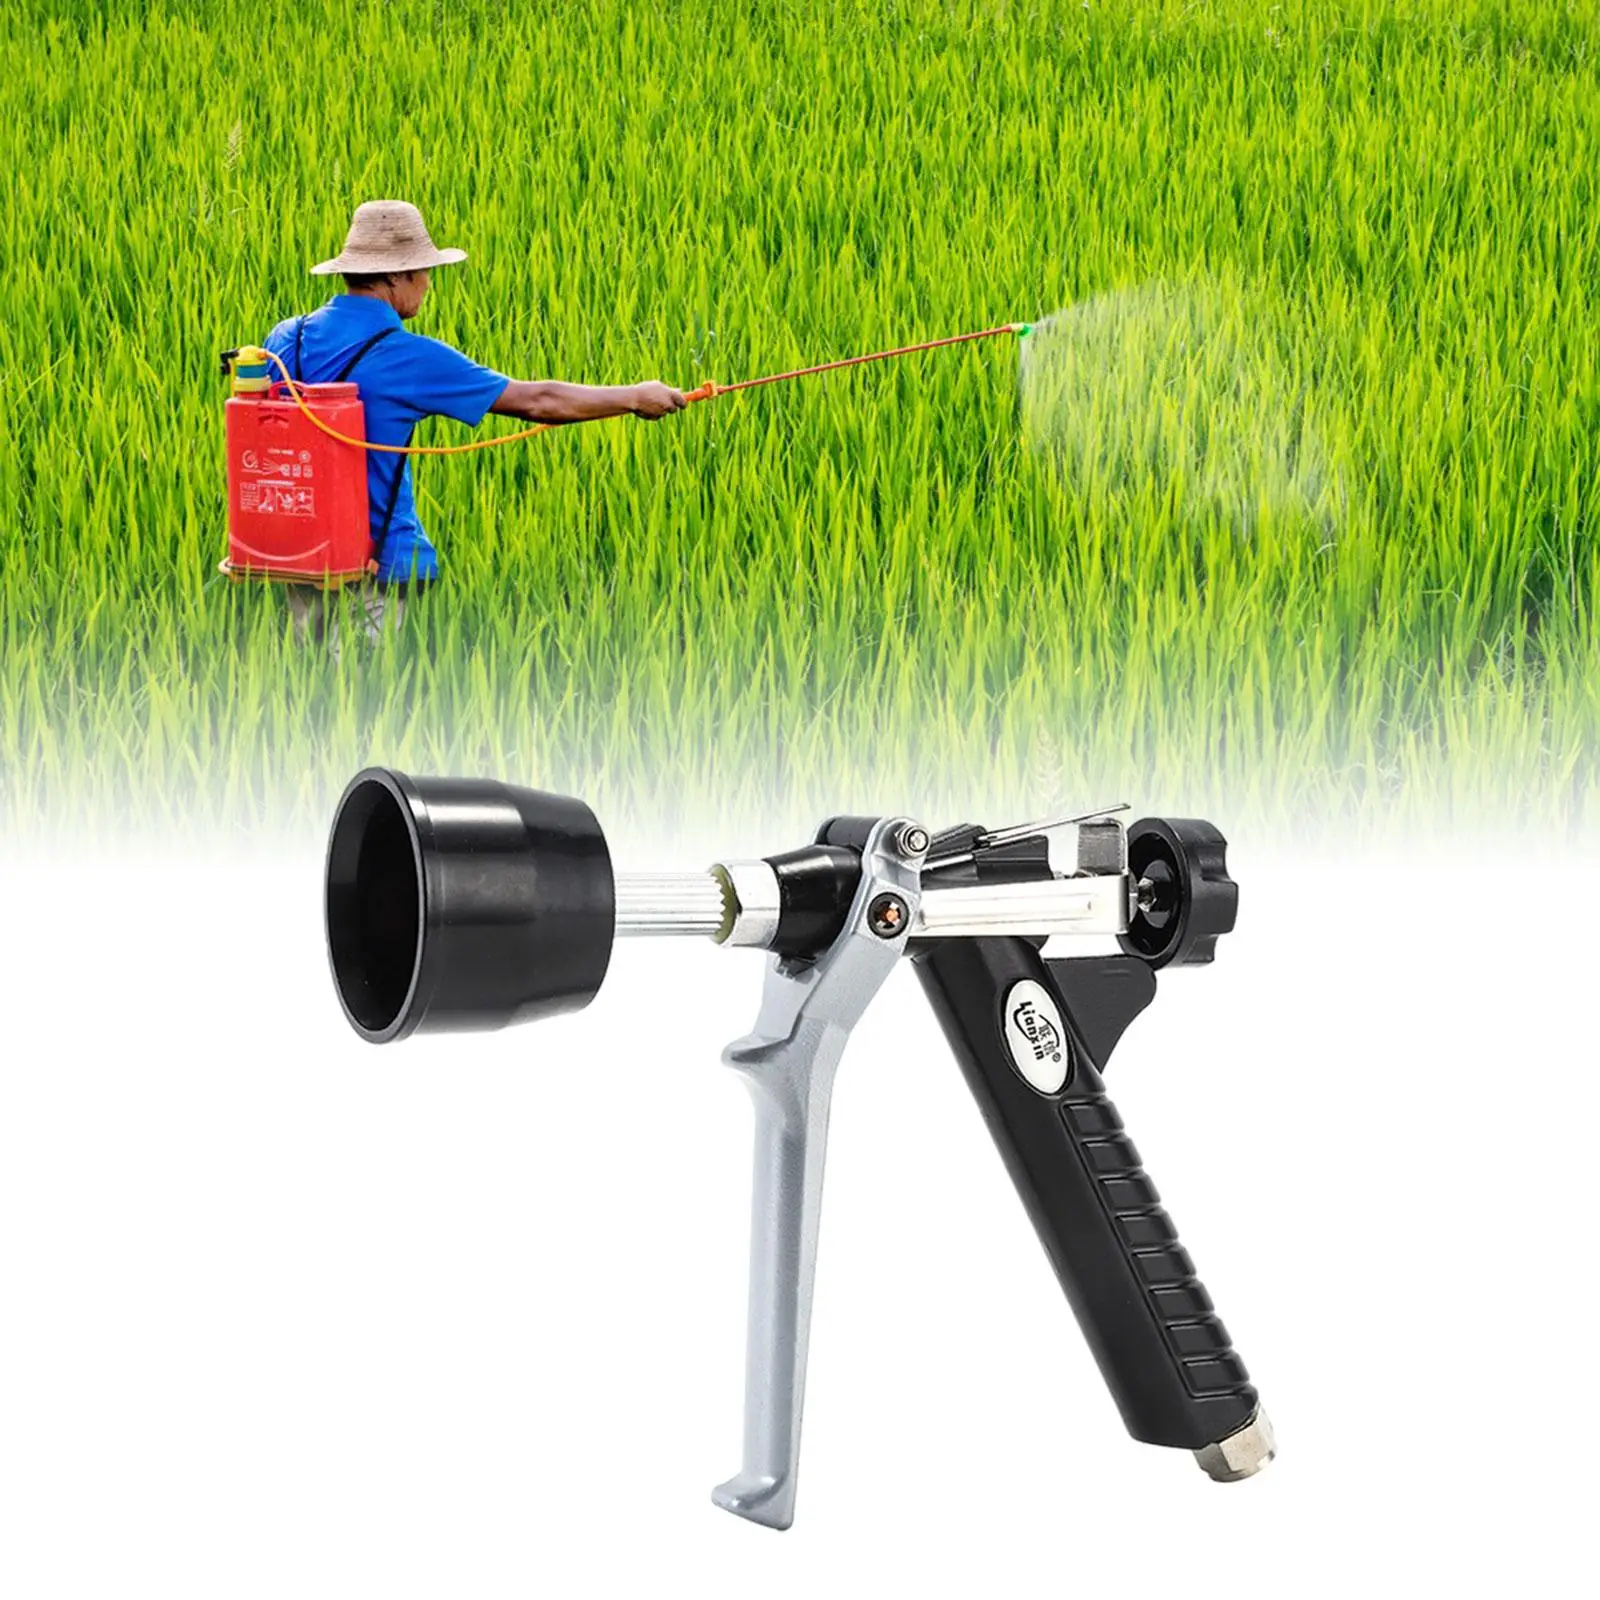 Garden Irrigation High Pressure Hose Nozzle Head Replace Parts for Lawn Yard